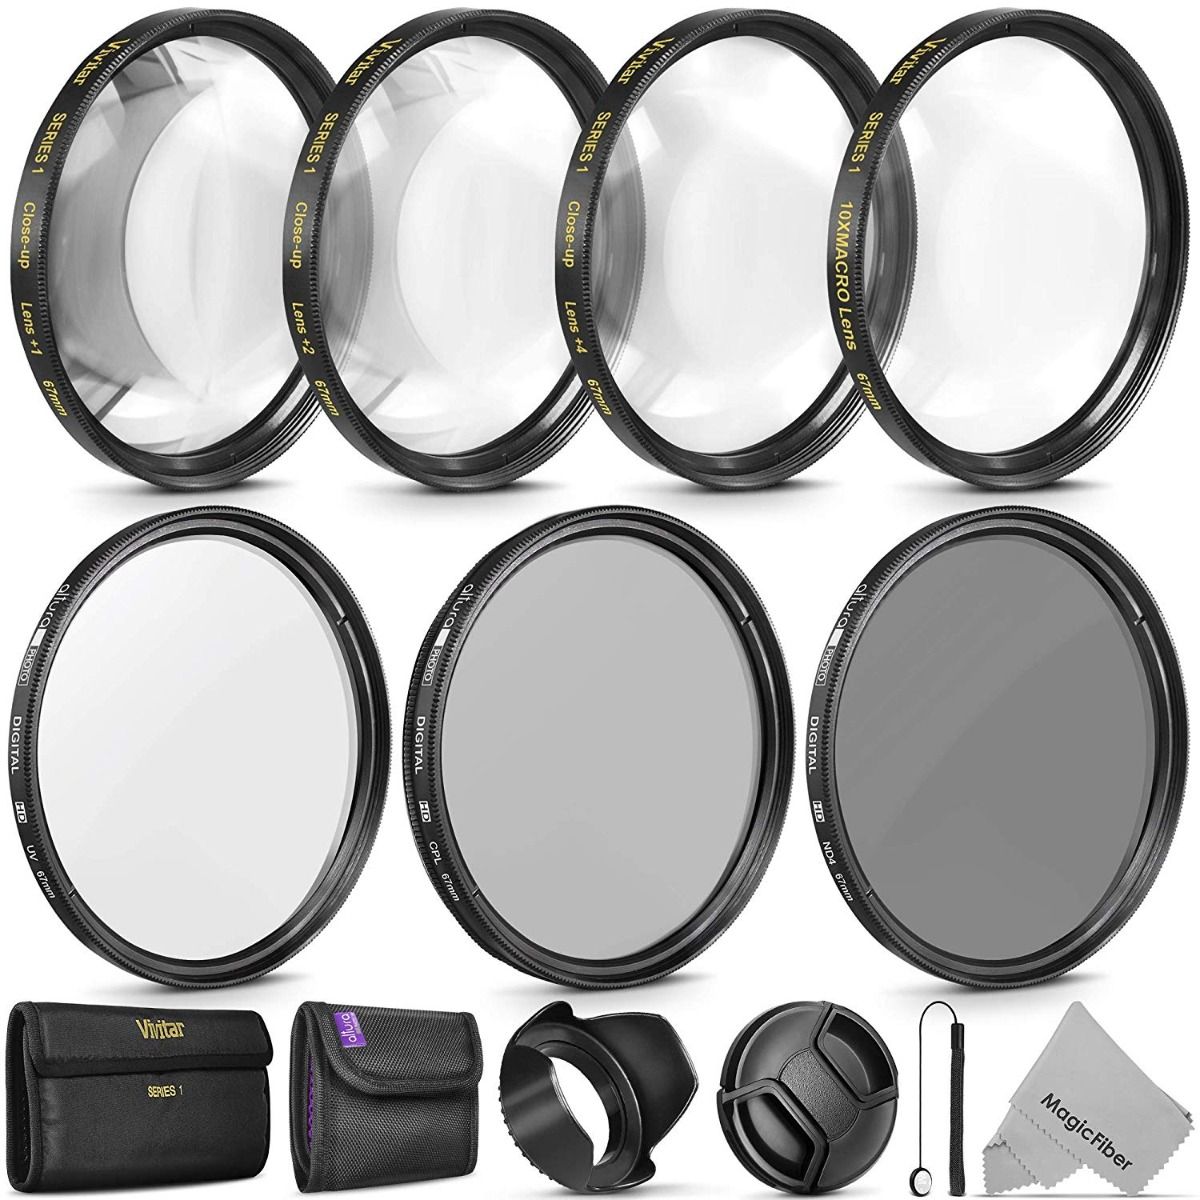 Albinar 37mm Wide Angle Lens,CPL-UV-FLD Filter Kit fo Sony HDR CX160 CX130 XR160 